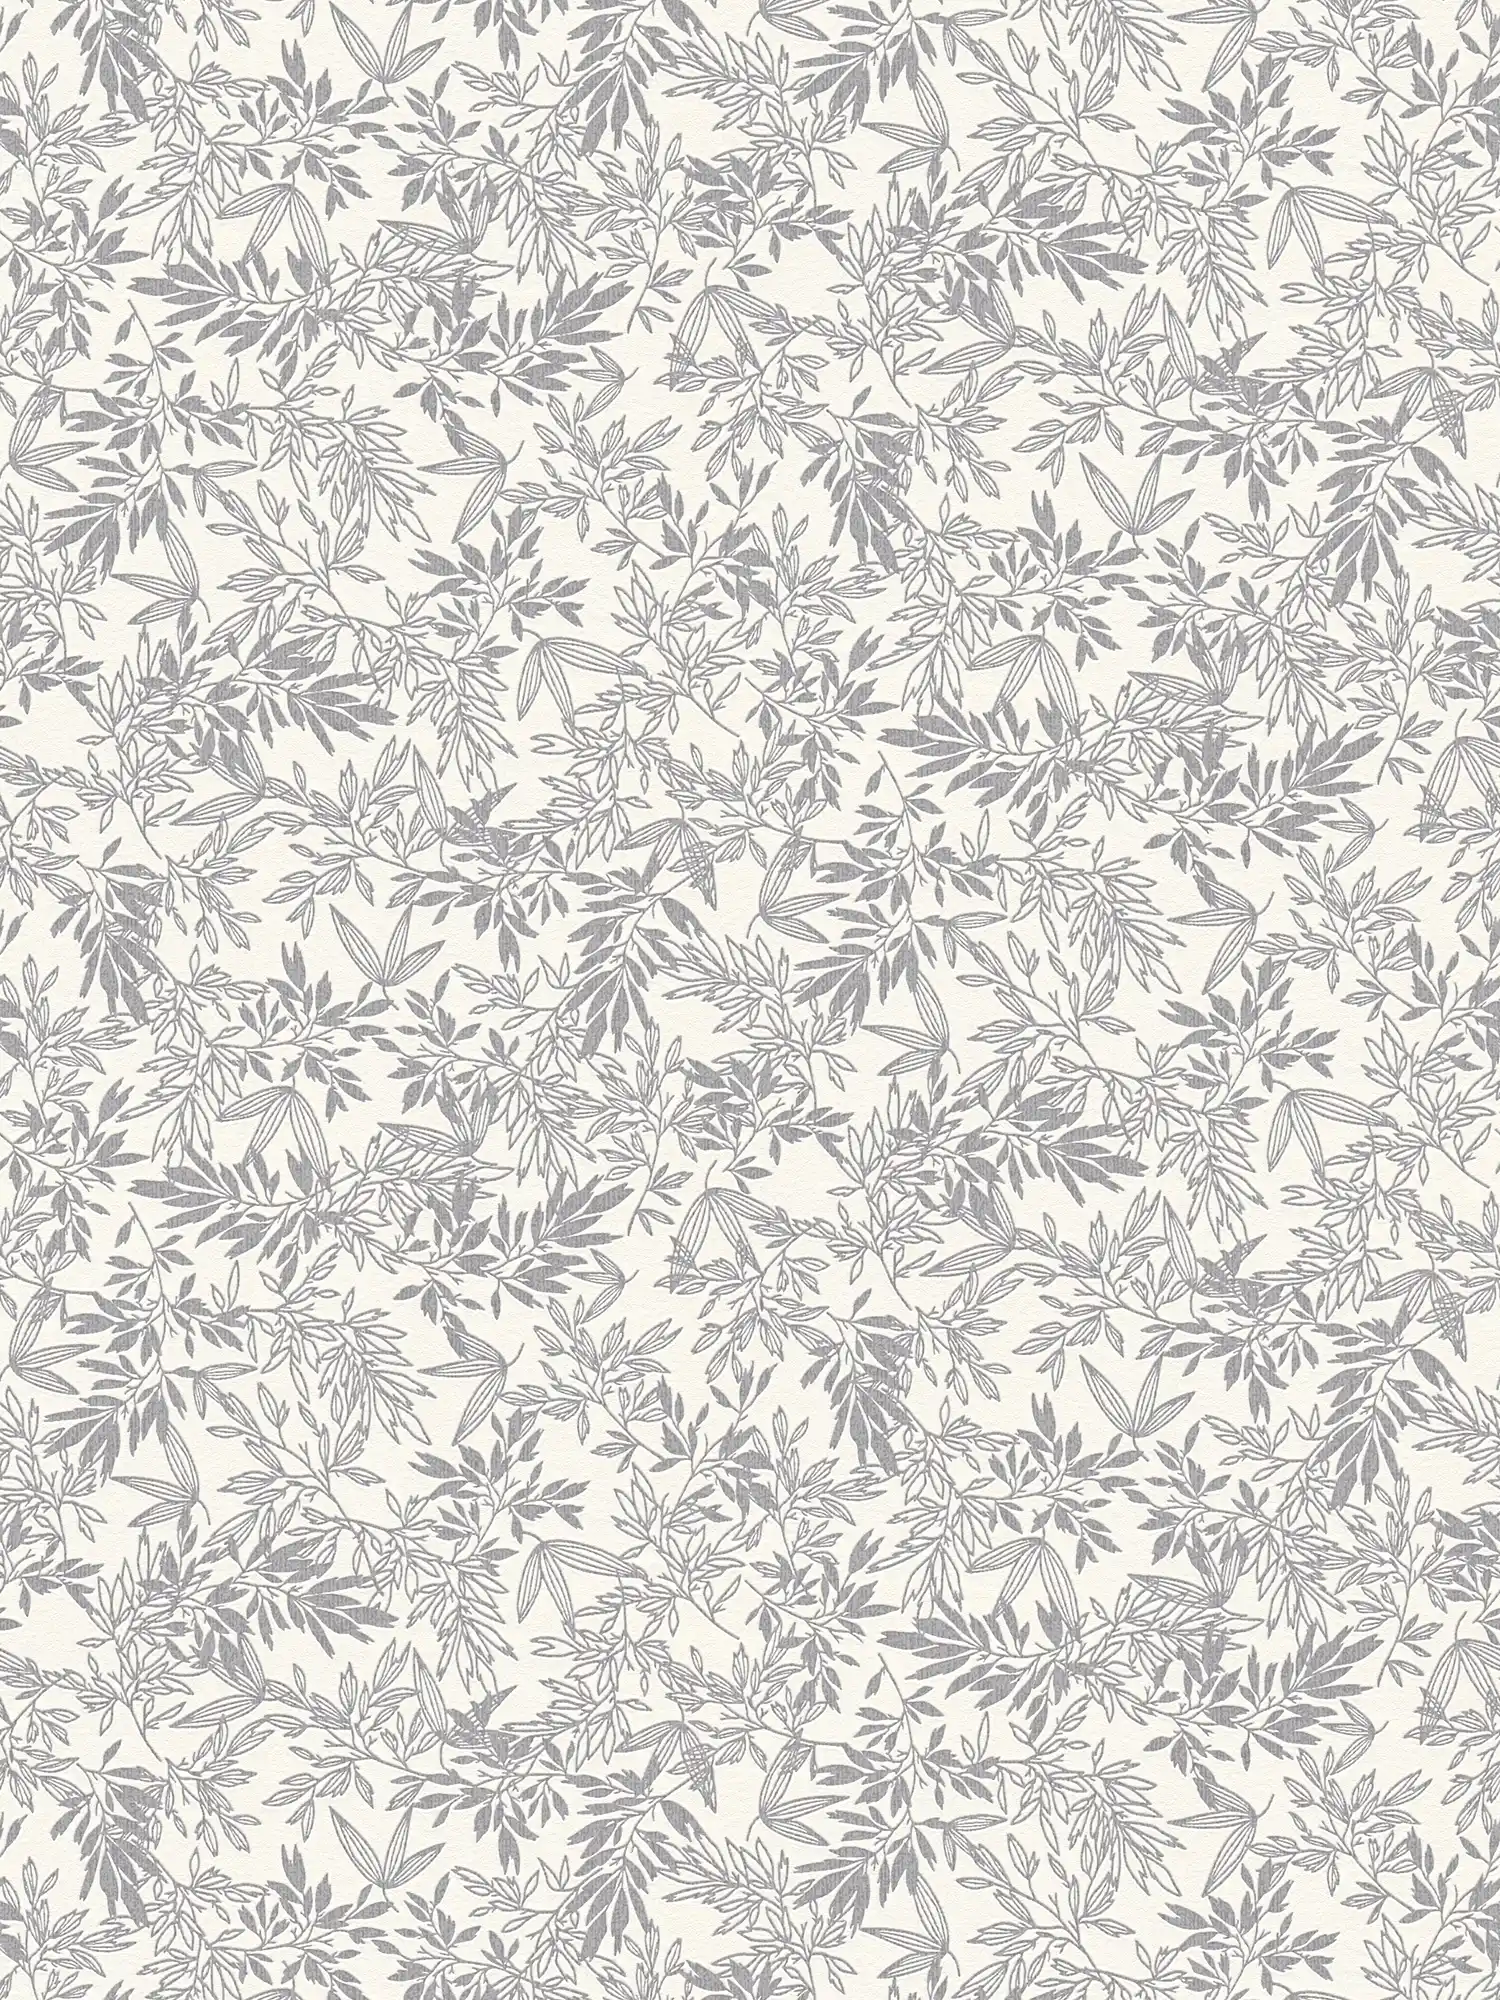 Floral wallpaper with leaves pattern in matt - grey, white
